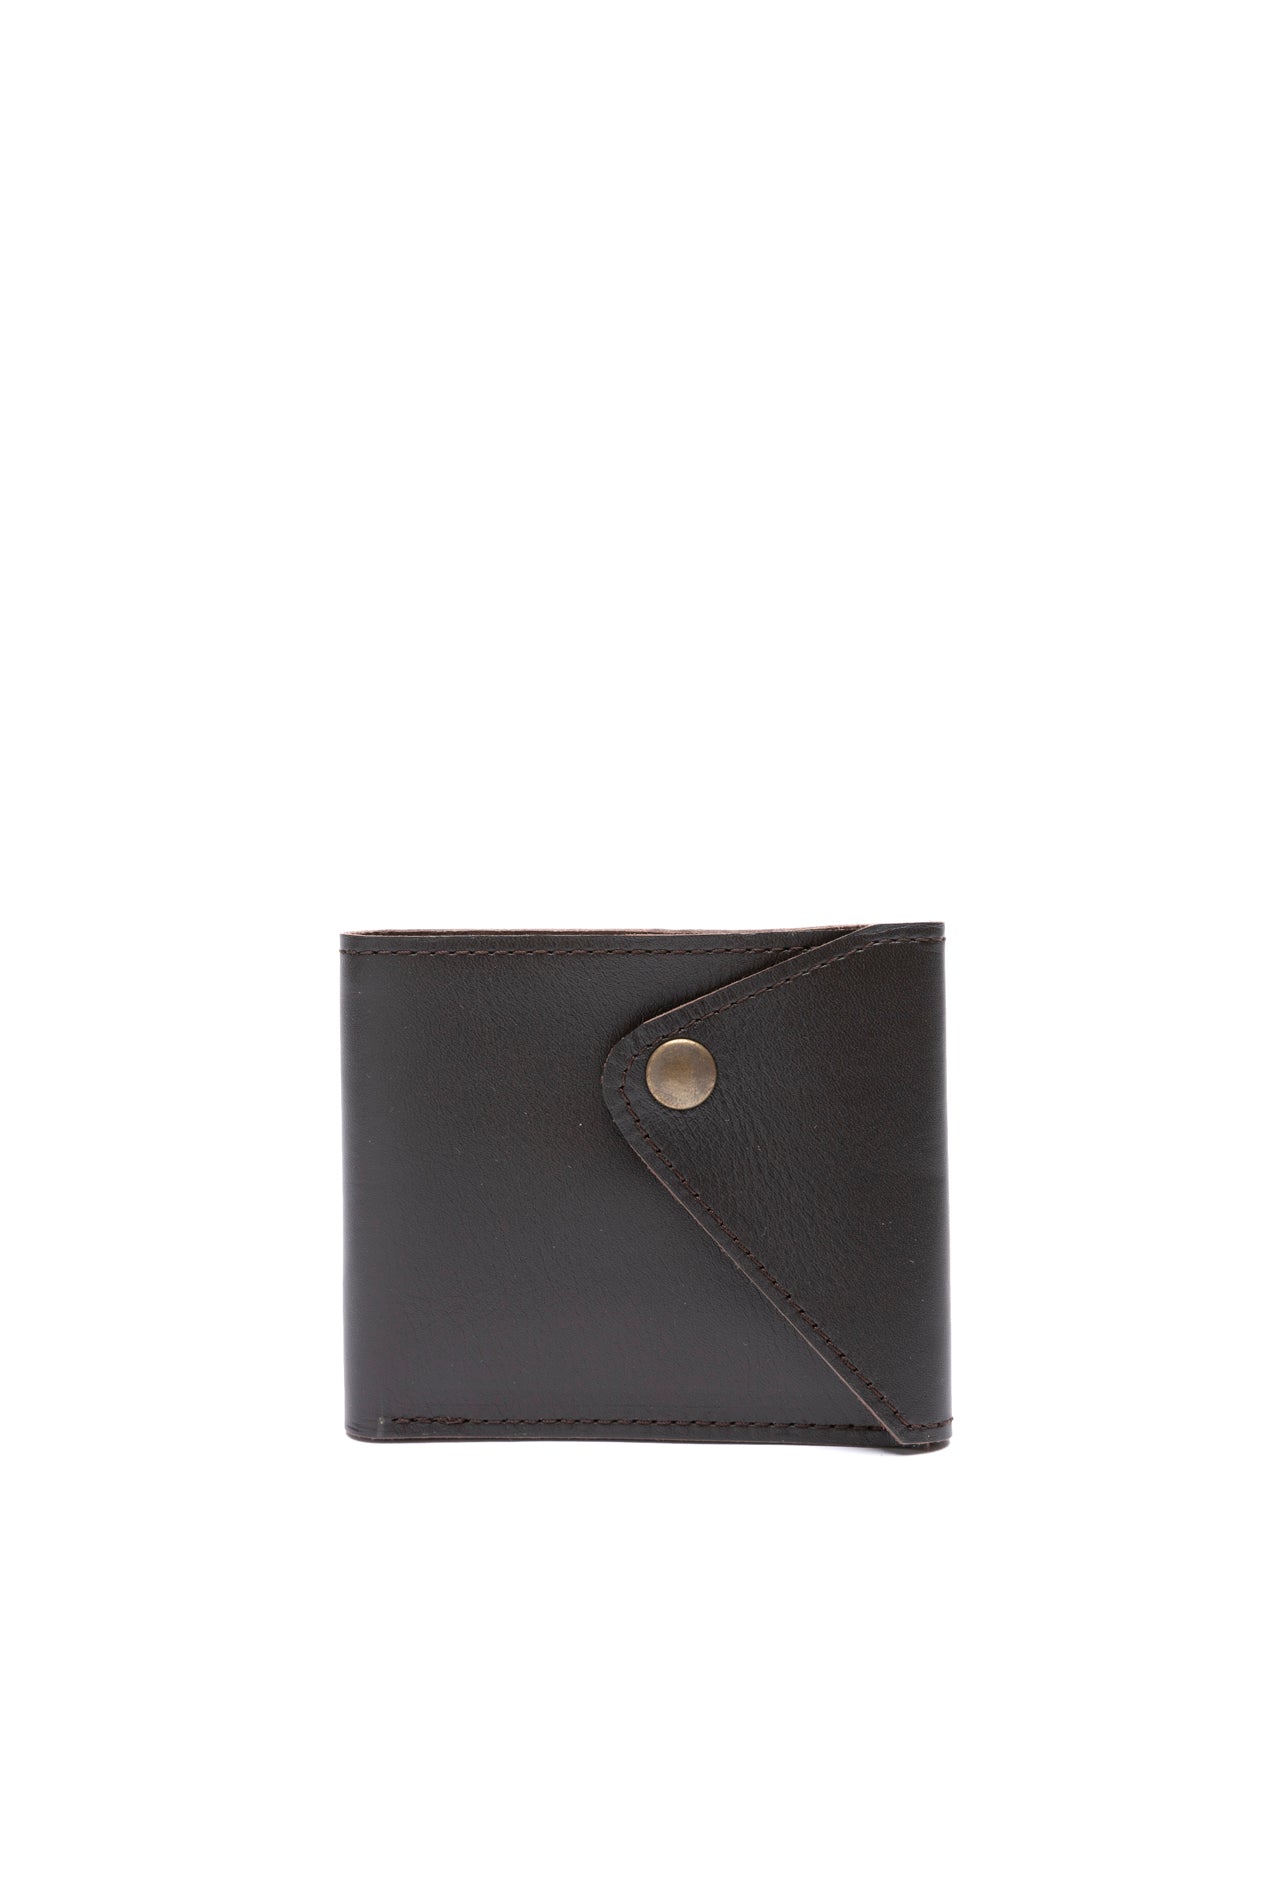 AMERICAN WALLET WITH BROHE | Chocolate